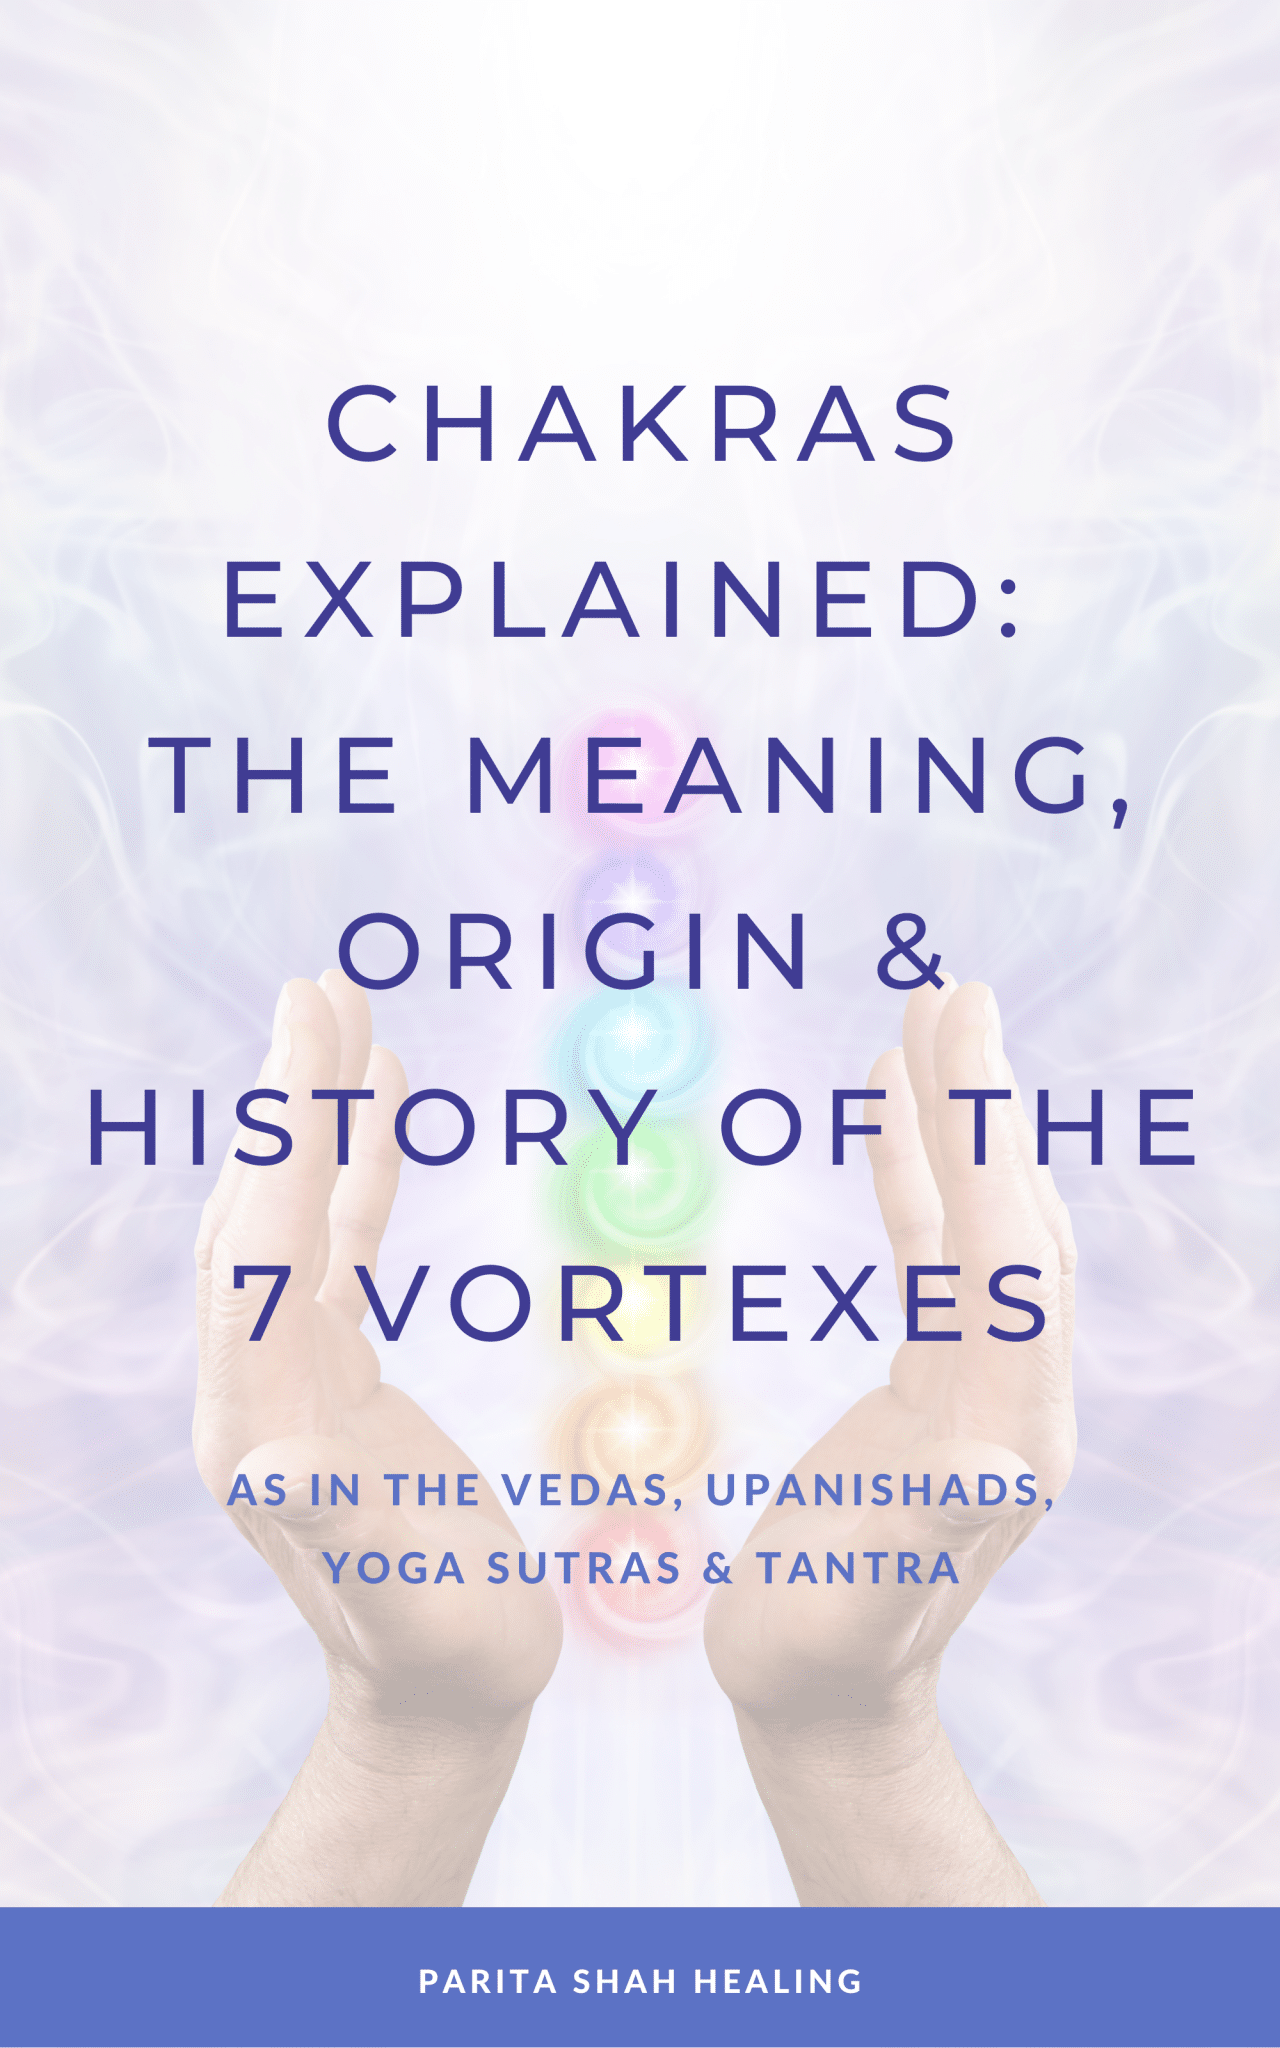 Chakra Energy Healing system (Foundation Text for learning Chakra